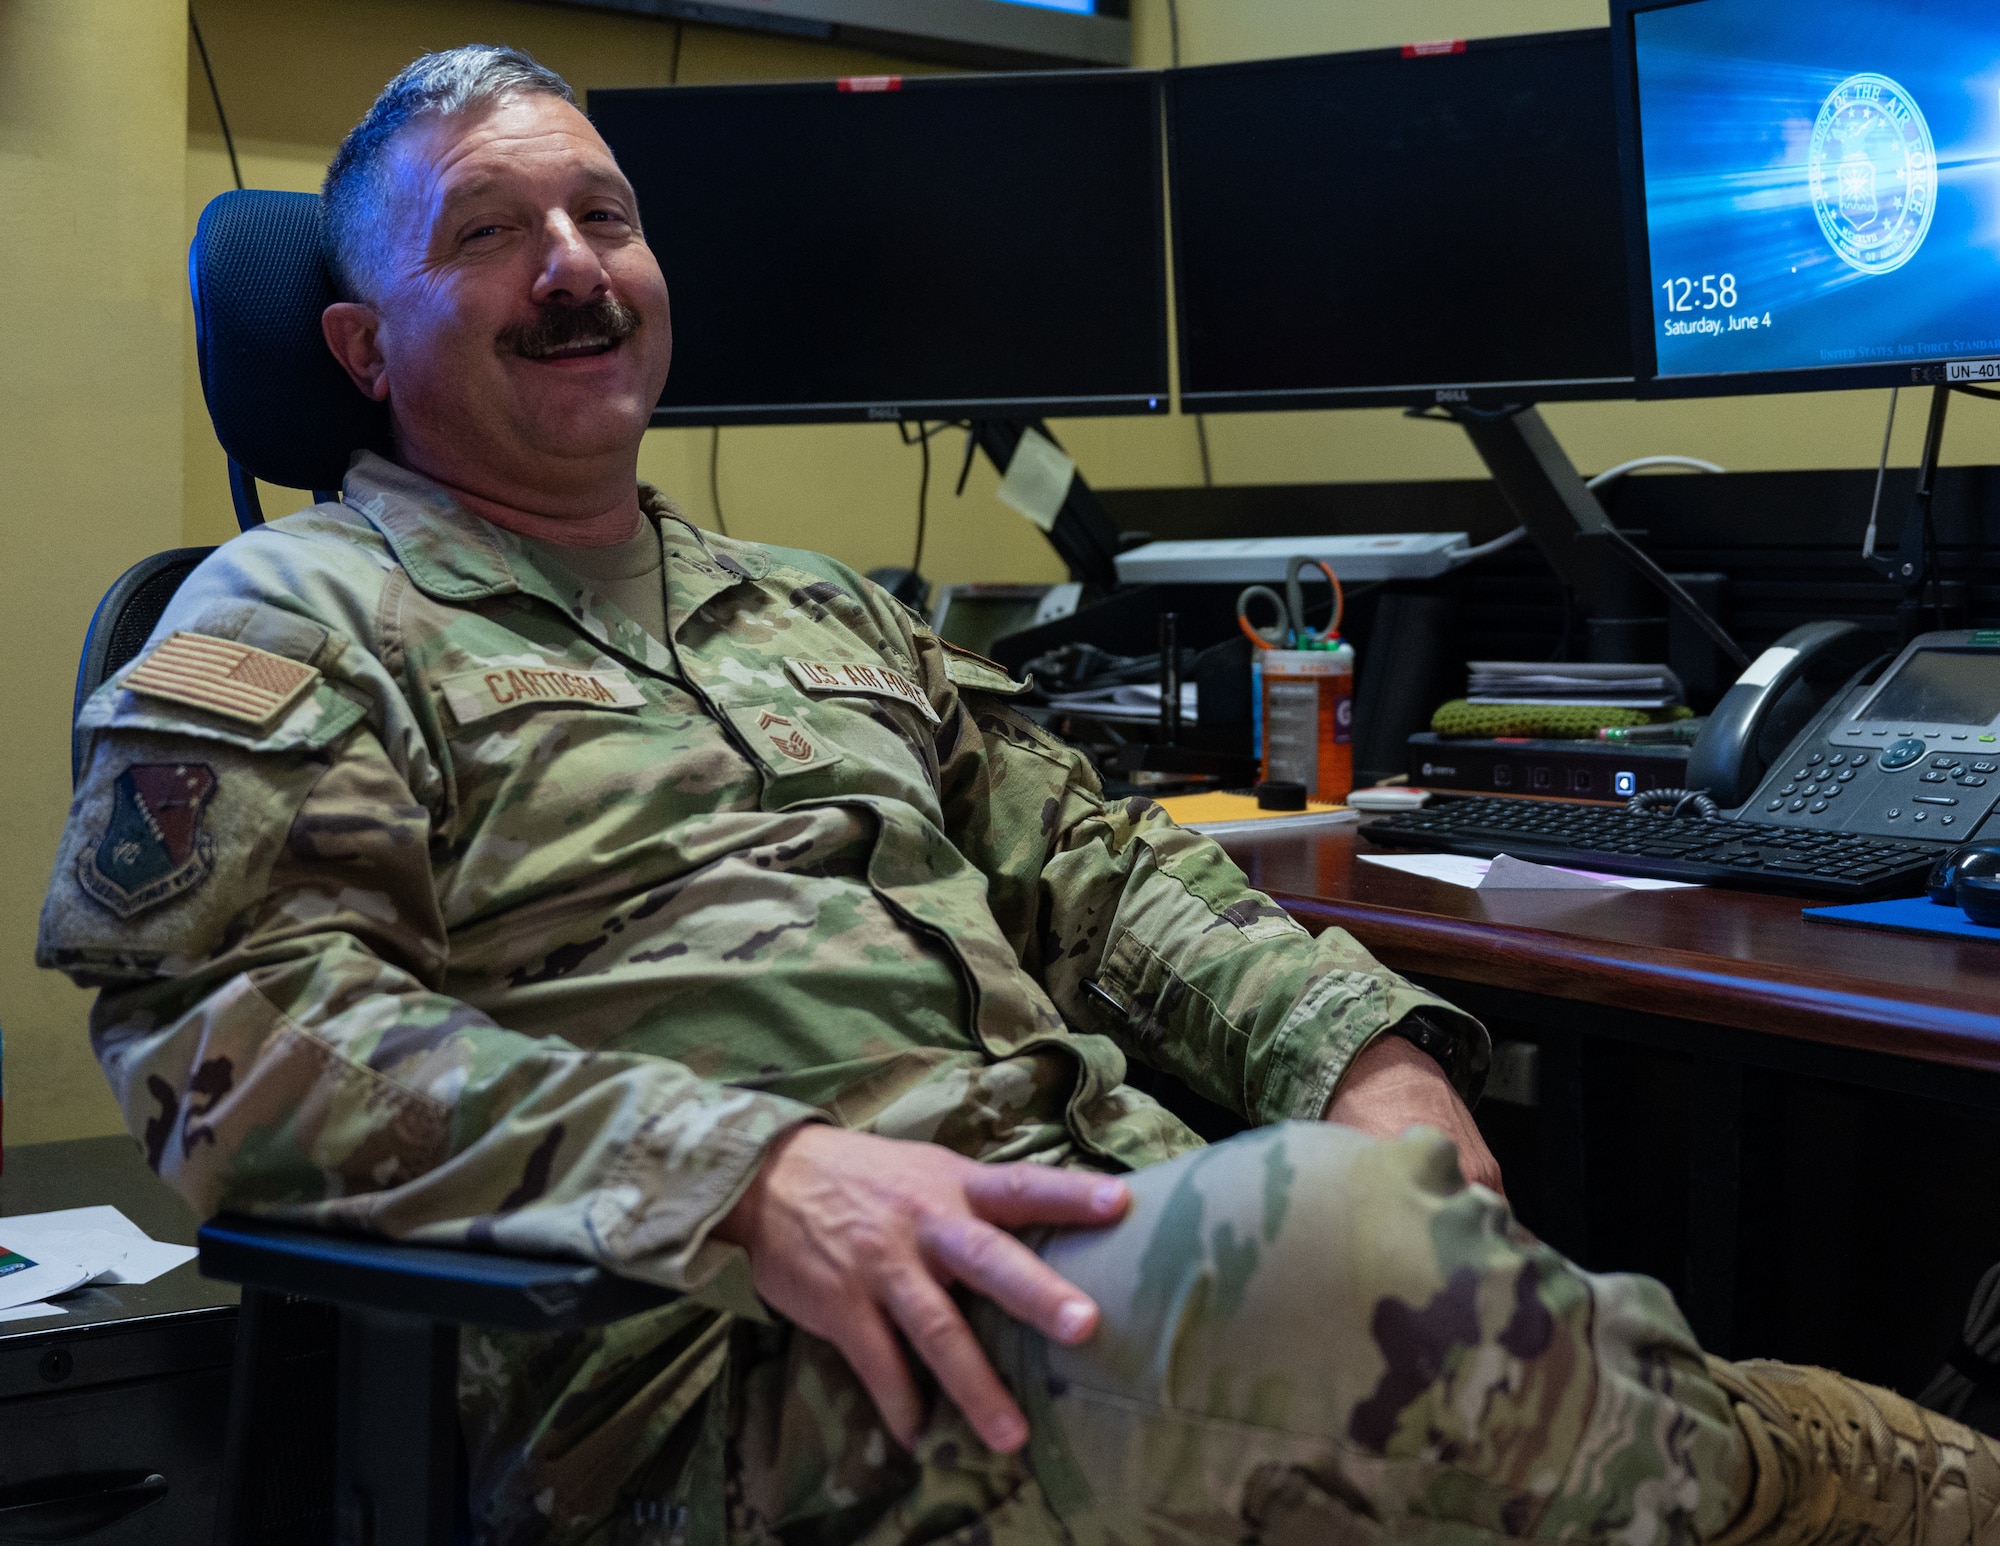 U.S. Air Force Senior Master Sgt. Edward Cartossa, command and control (C2) operations specialist assigned to the 379th Air Expeditionary Wing, Al Udeid Air Base, Qatar, sits in the AUAB C2 office in the Wing Operation Center to talk about his mission, during Accurate Test 22 at Thumrait Air Base, Oman, June 4, 2022.  Cartossa’s C2 operations team employed missile strike early warning capabilities, for the first time, in a combat environment while forward deployed to Oman in May 2022. (U.S. Air Force photo by Staff Sgt. Dana Tourtellotte)